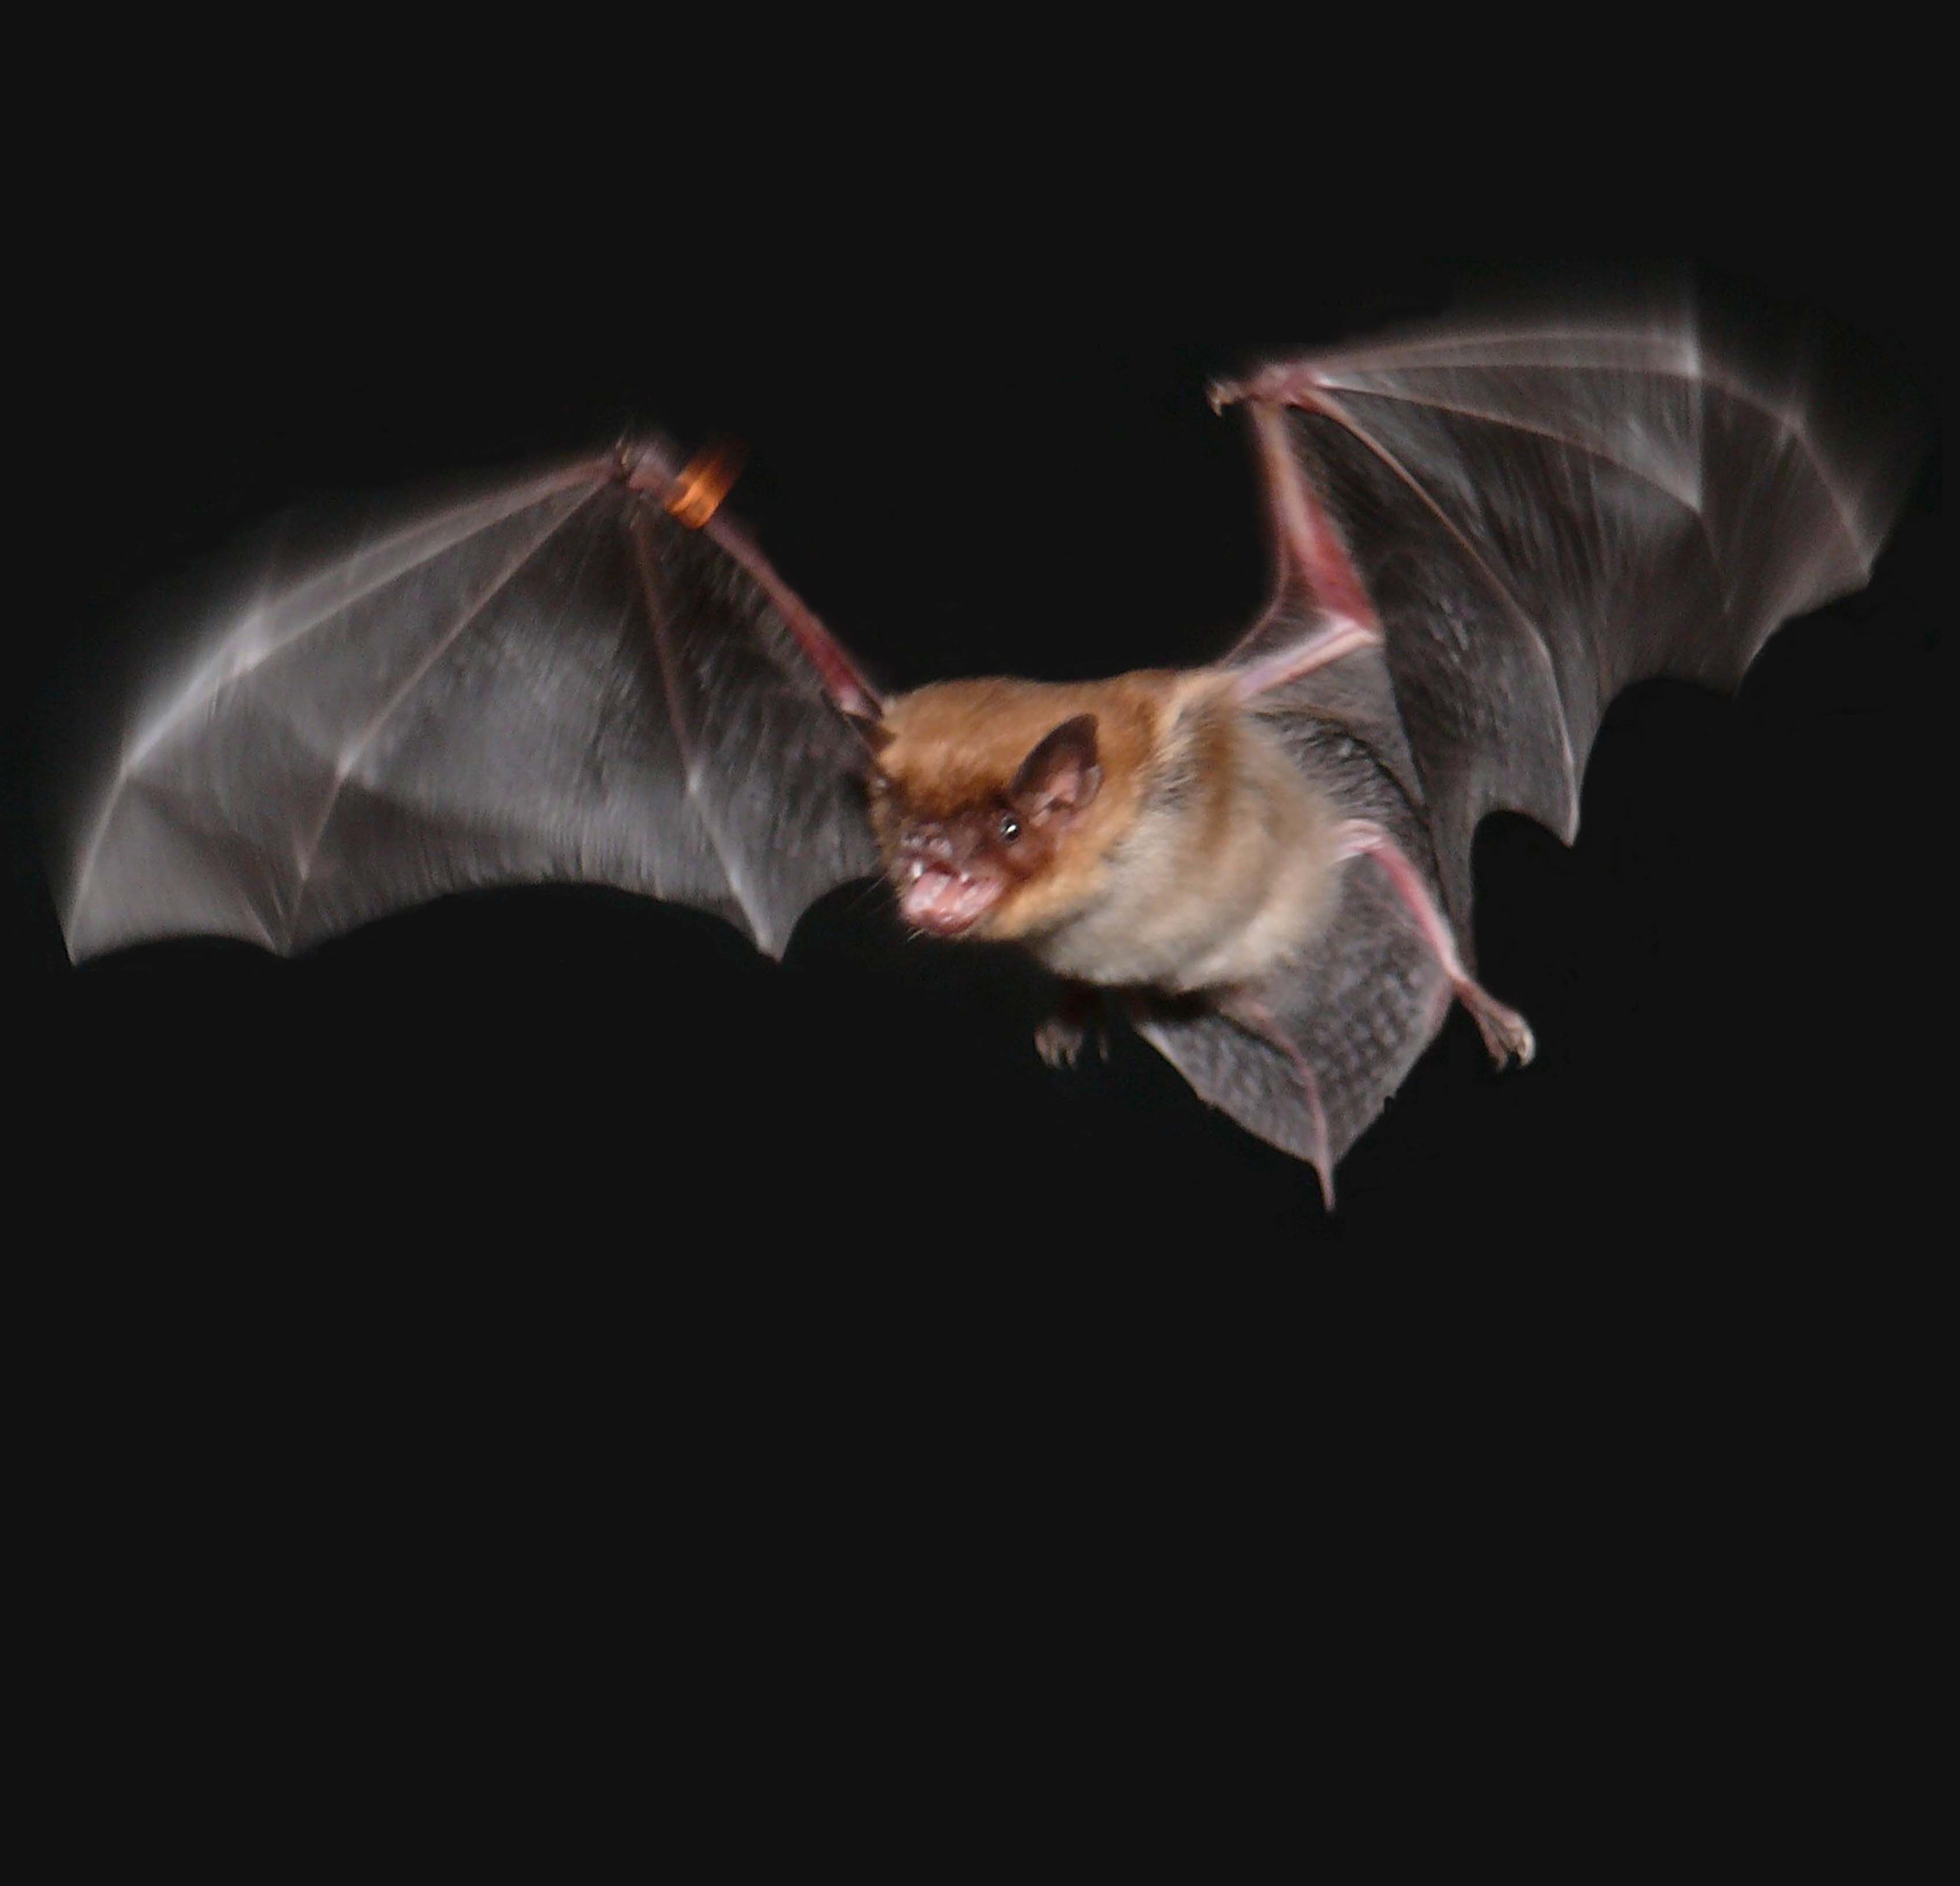 Study on Bats, Rats that Analysis of Many Species Is Required Better Understand the | A. James Clark School of Engineering, University of Maryland